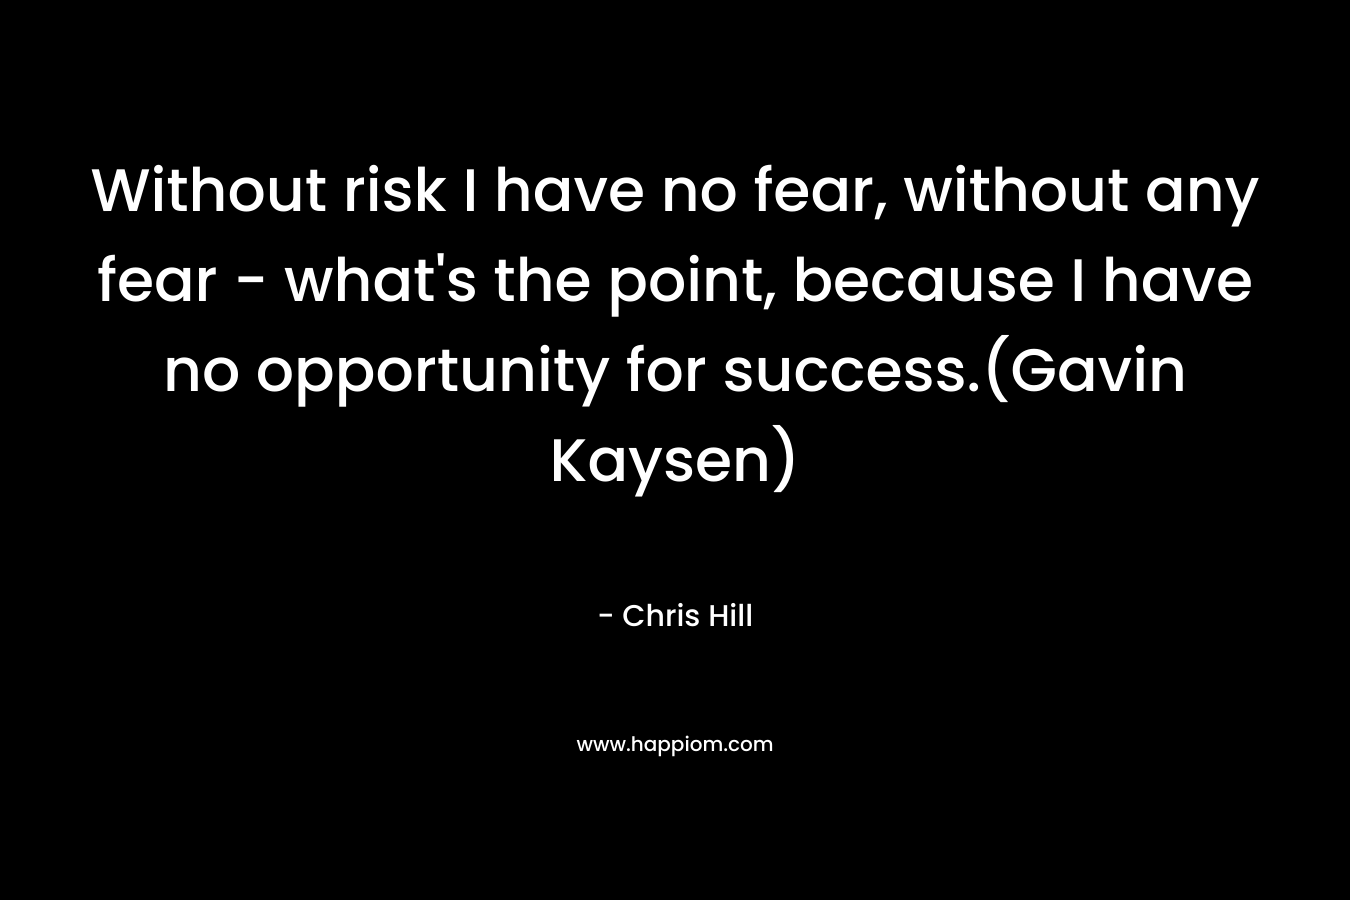 Without risk I have no fear, without any fear - what's the point, because I have no opportunity for success.(Gavin Kaysen)